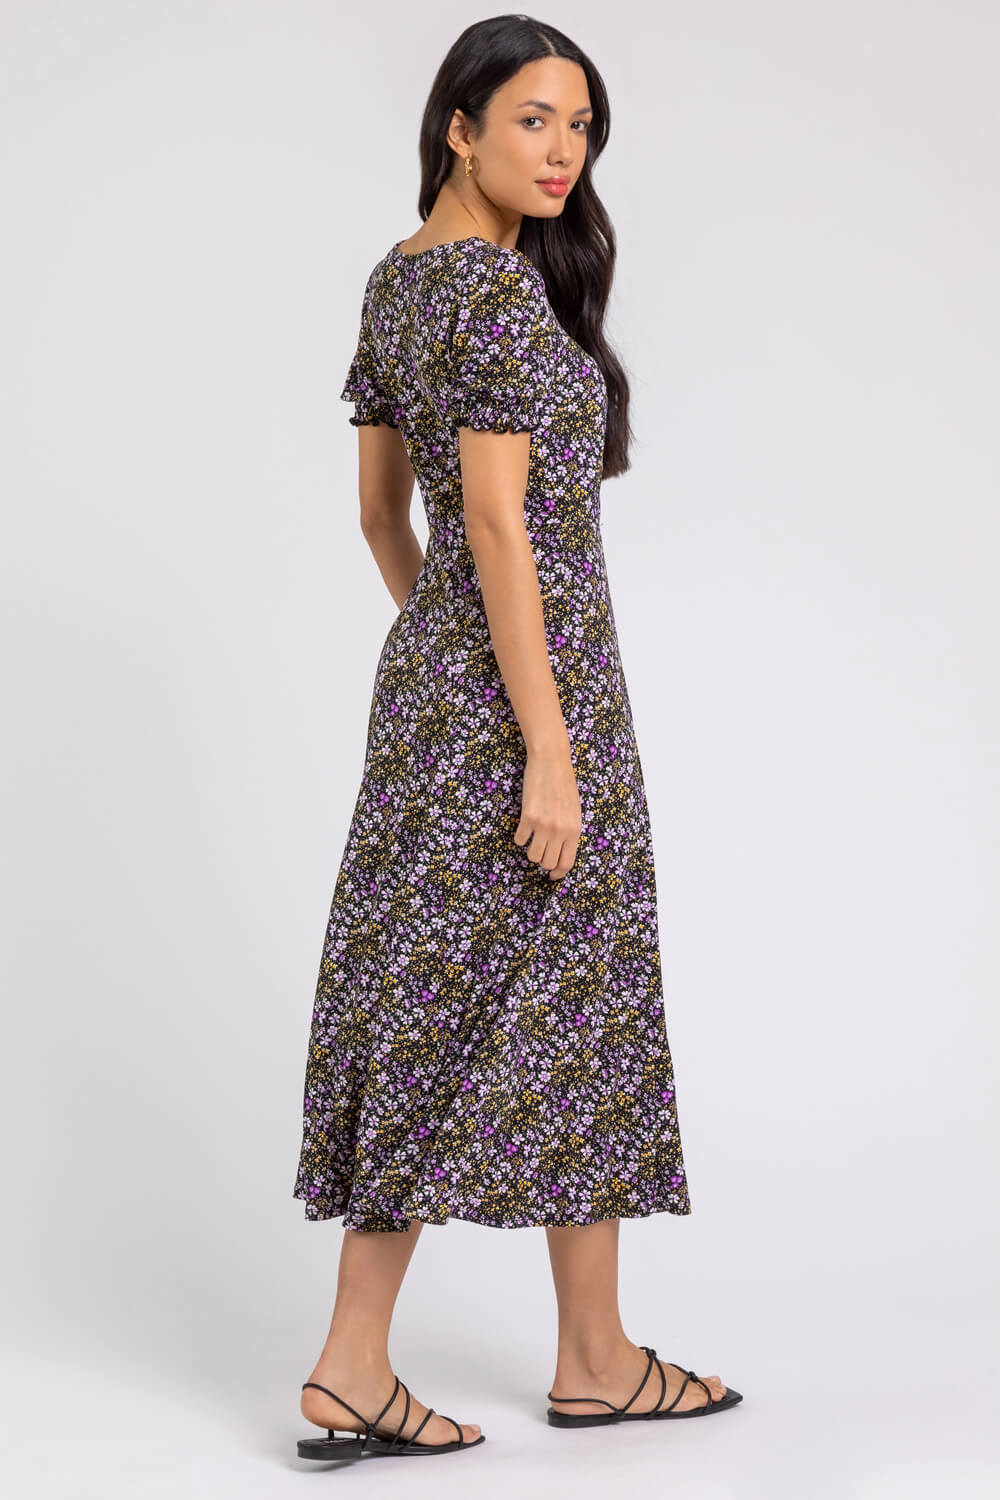 Ditsy Floral Ruched Midi Dress in Lilac - Roman Originals UK